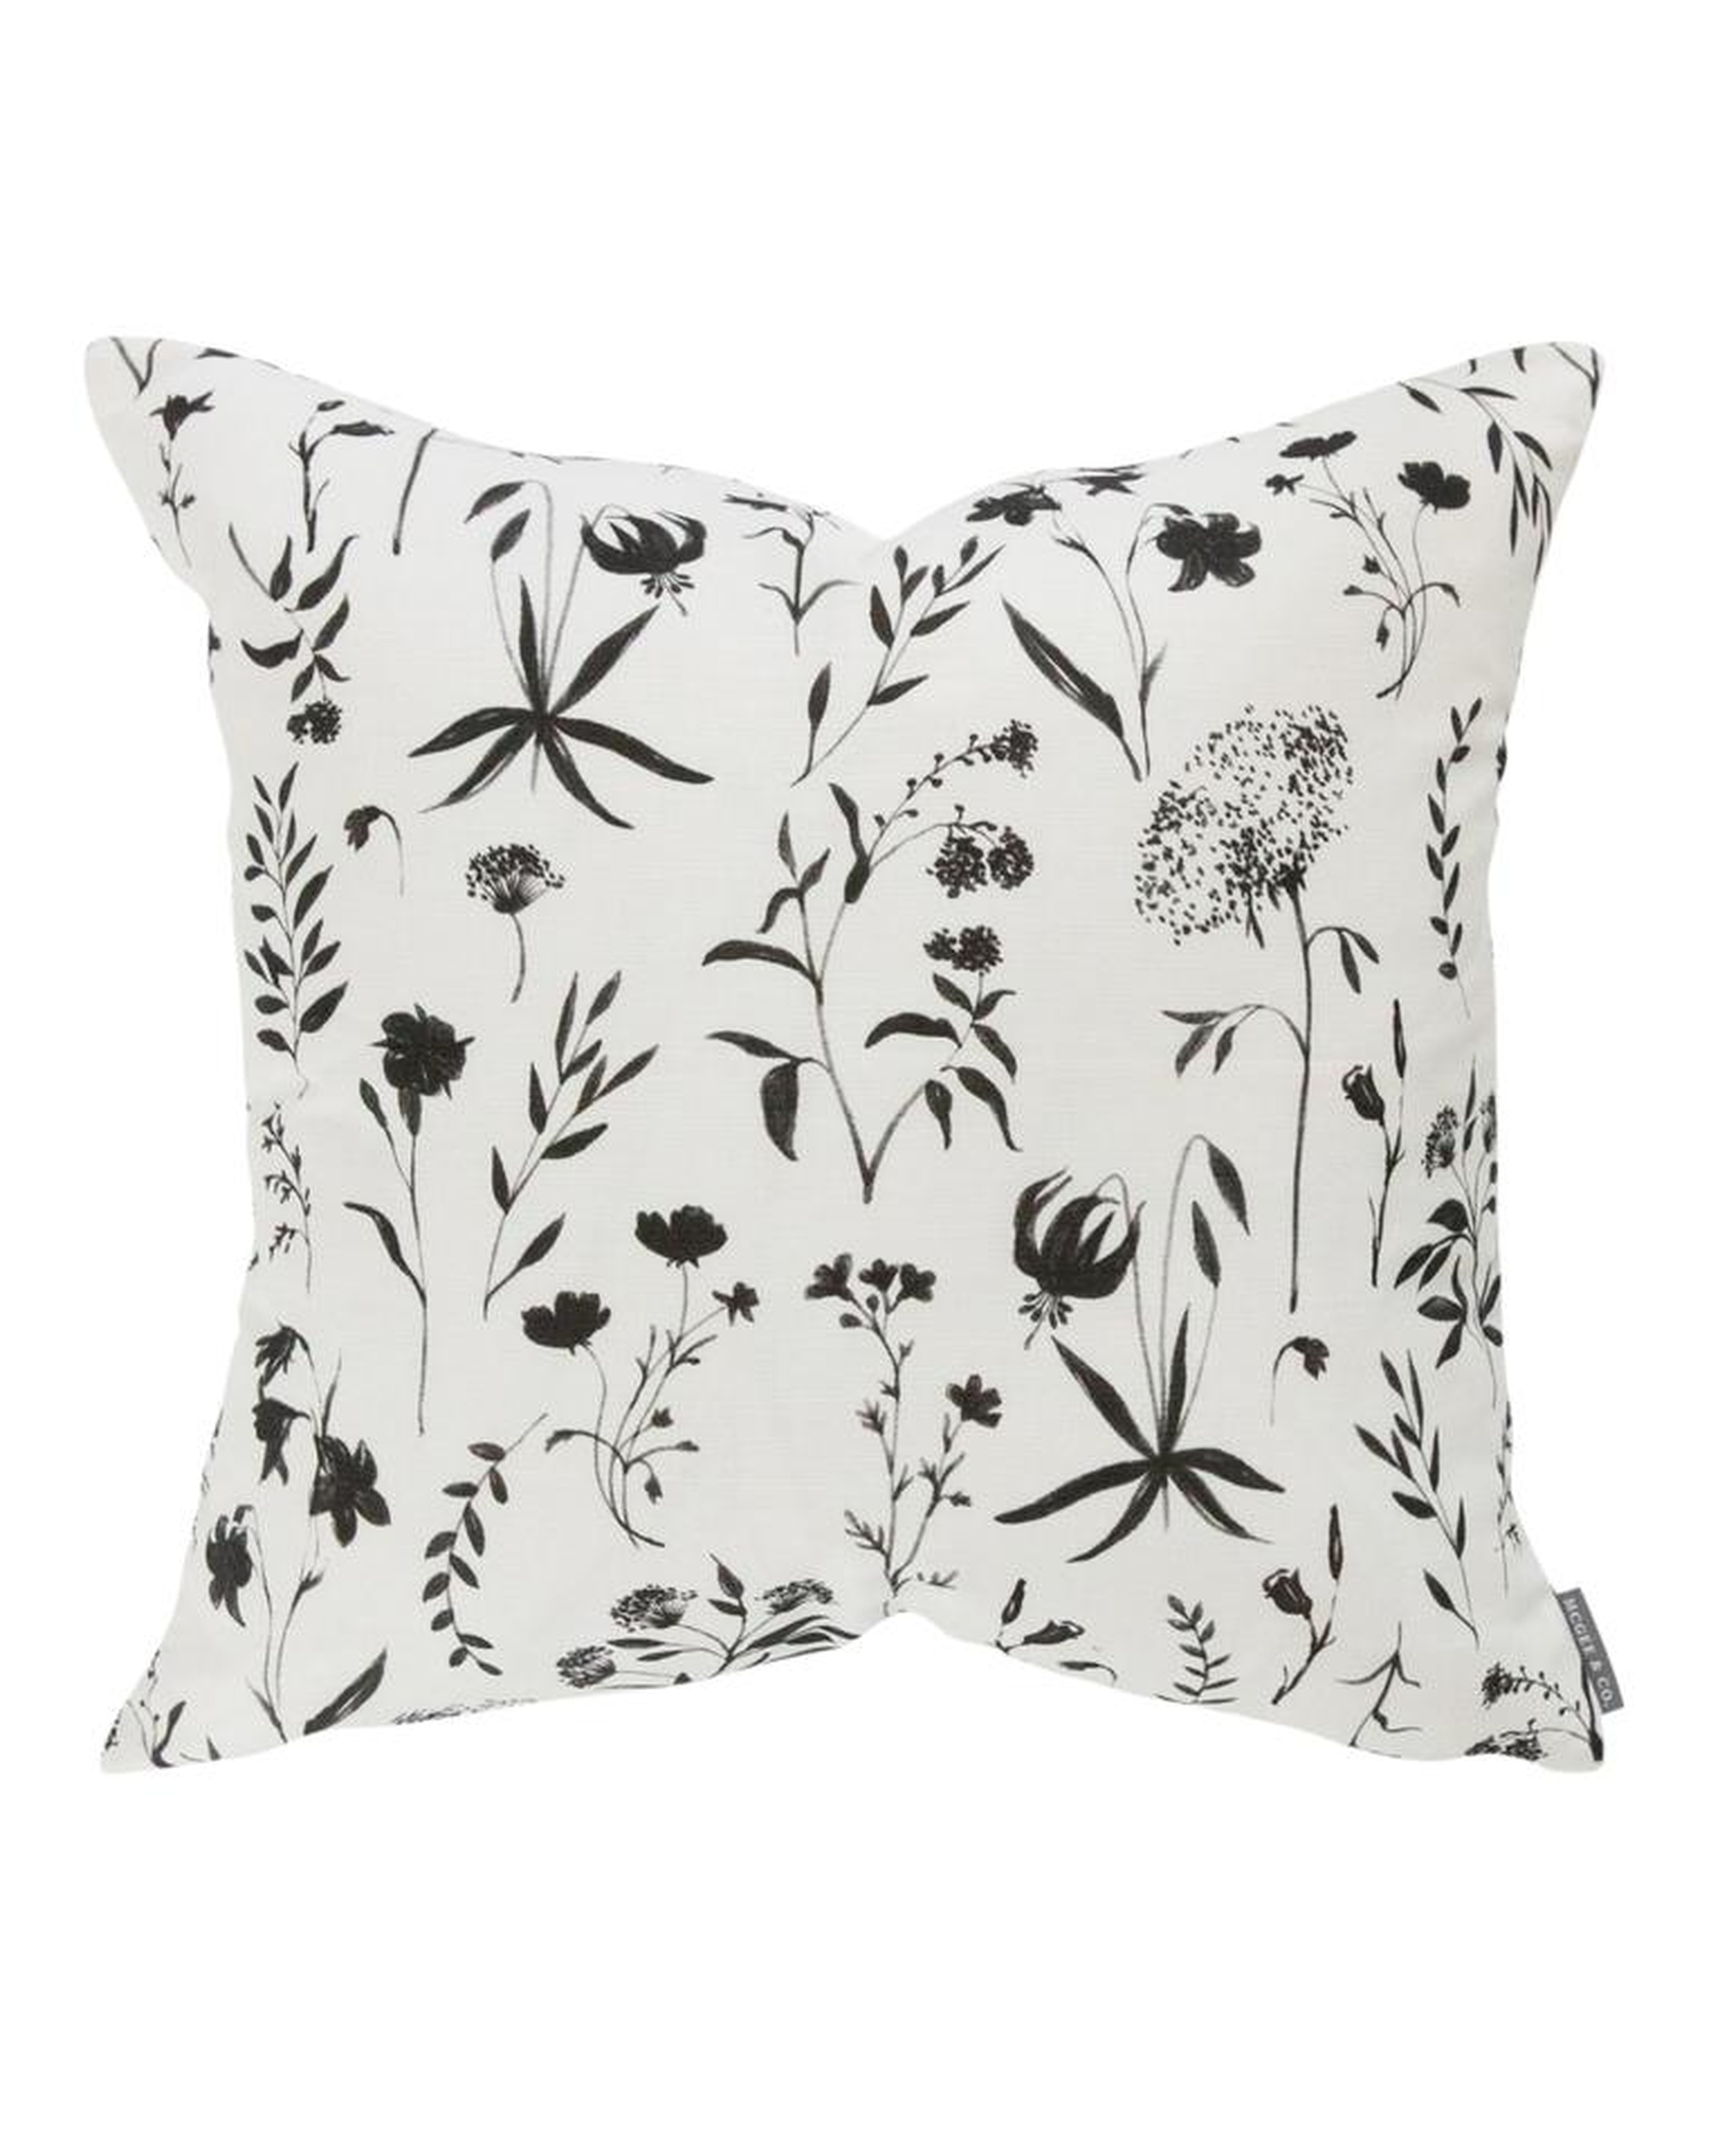 JUNO FLORAL PILLOW COVER - McGee & Co.